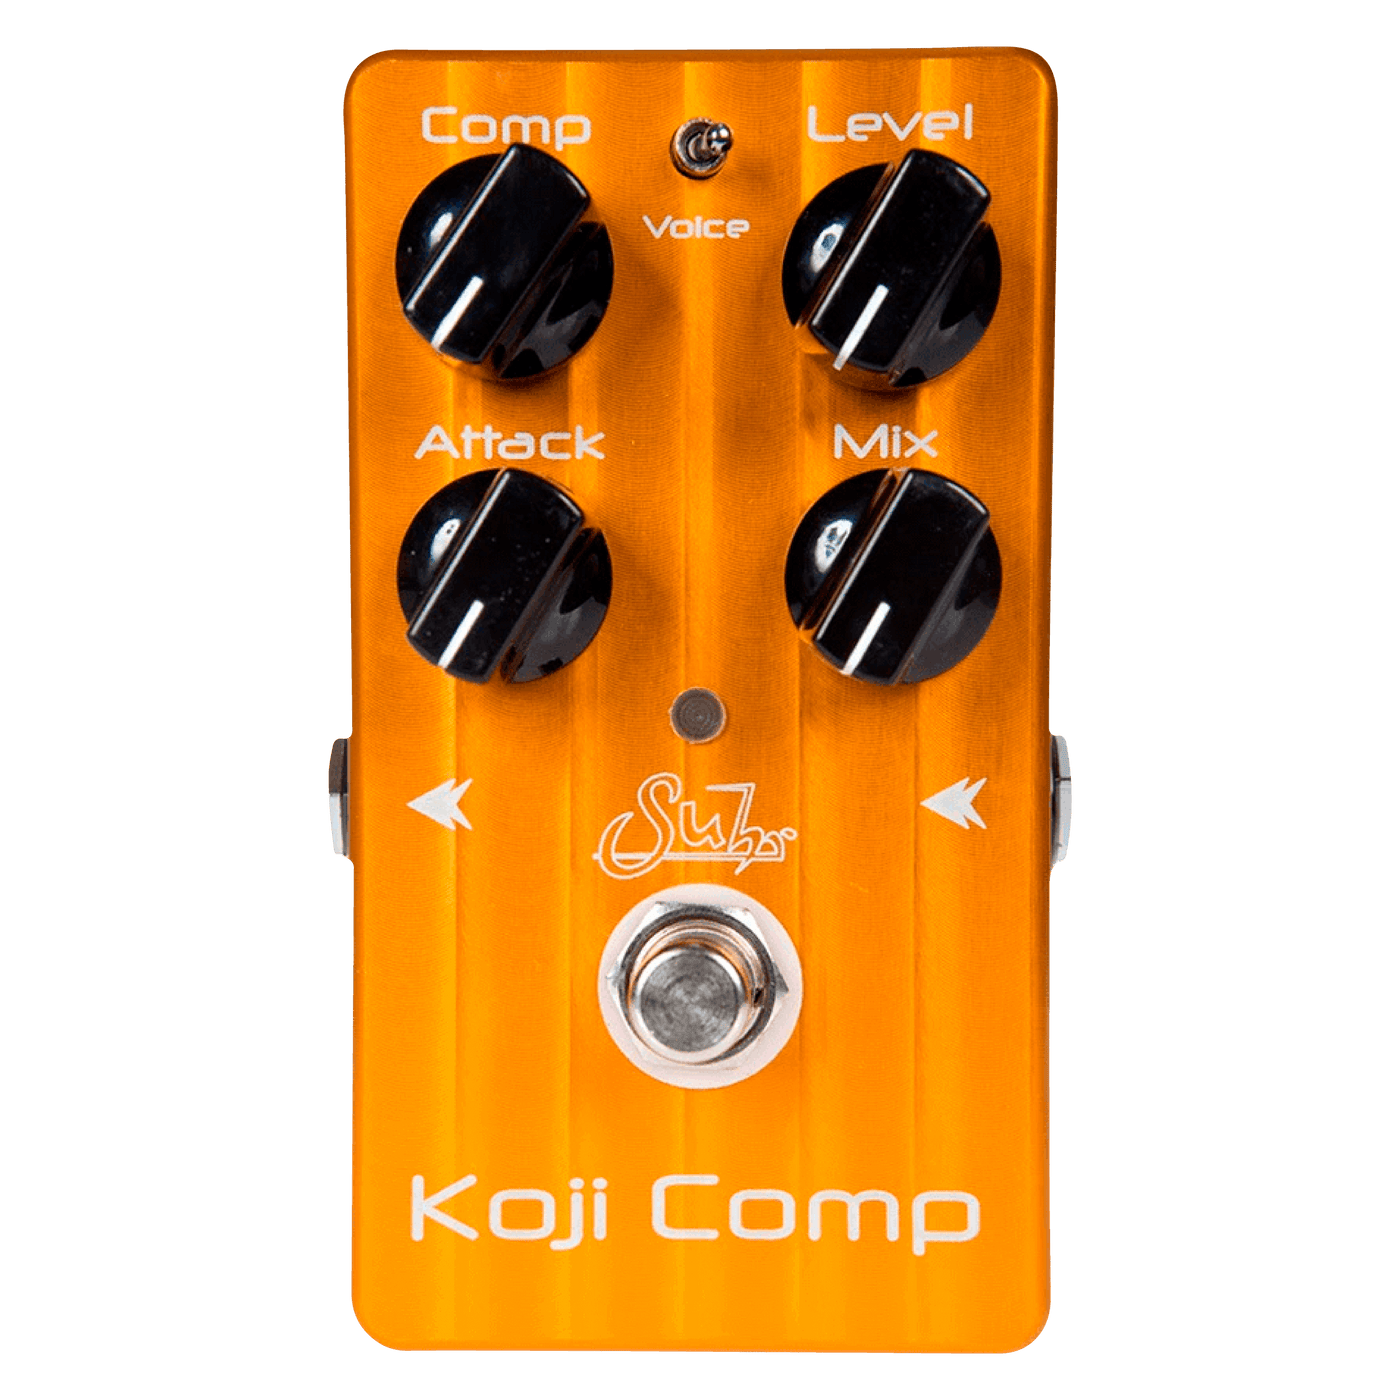 Suhr Koji Comp - $259990 - Gearhub - The Koji Comp is a versatile analog compressor, designed to offer a wealth of vintage and modern style compression effects without compromising your tone.With a simple twist of the Mix control, or flick of Koji’s Voice switch, you can easily create a limitless range of compression effects. Whether you choose subtle, transparent compression for smoothing out your rhythms, or dial in warm and squishy tones to take you into R&B and Country territory -the Koji Comp is possib